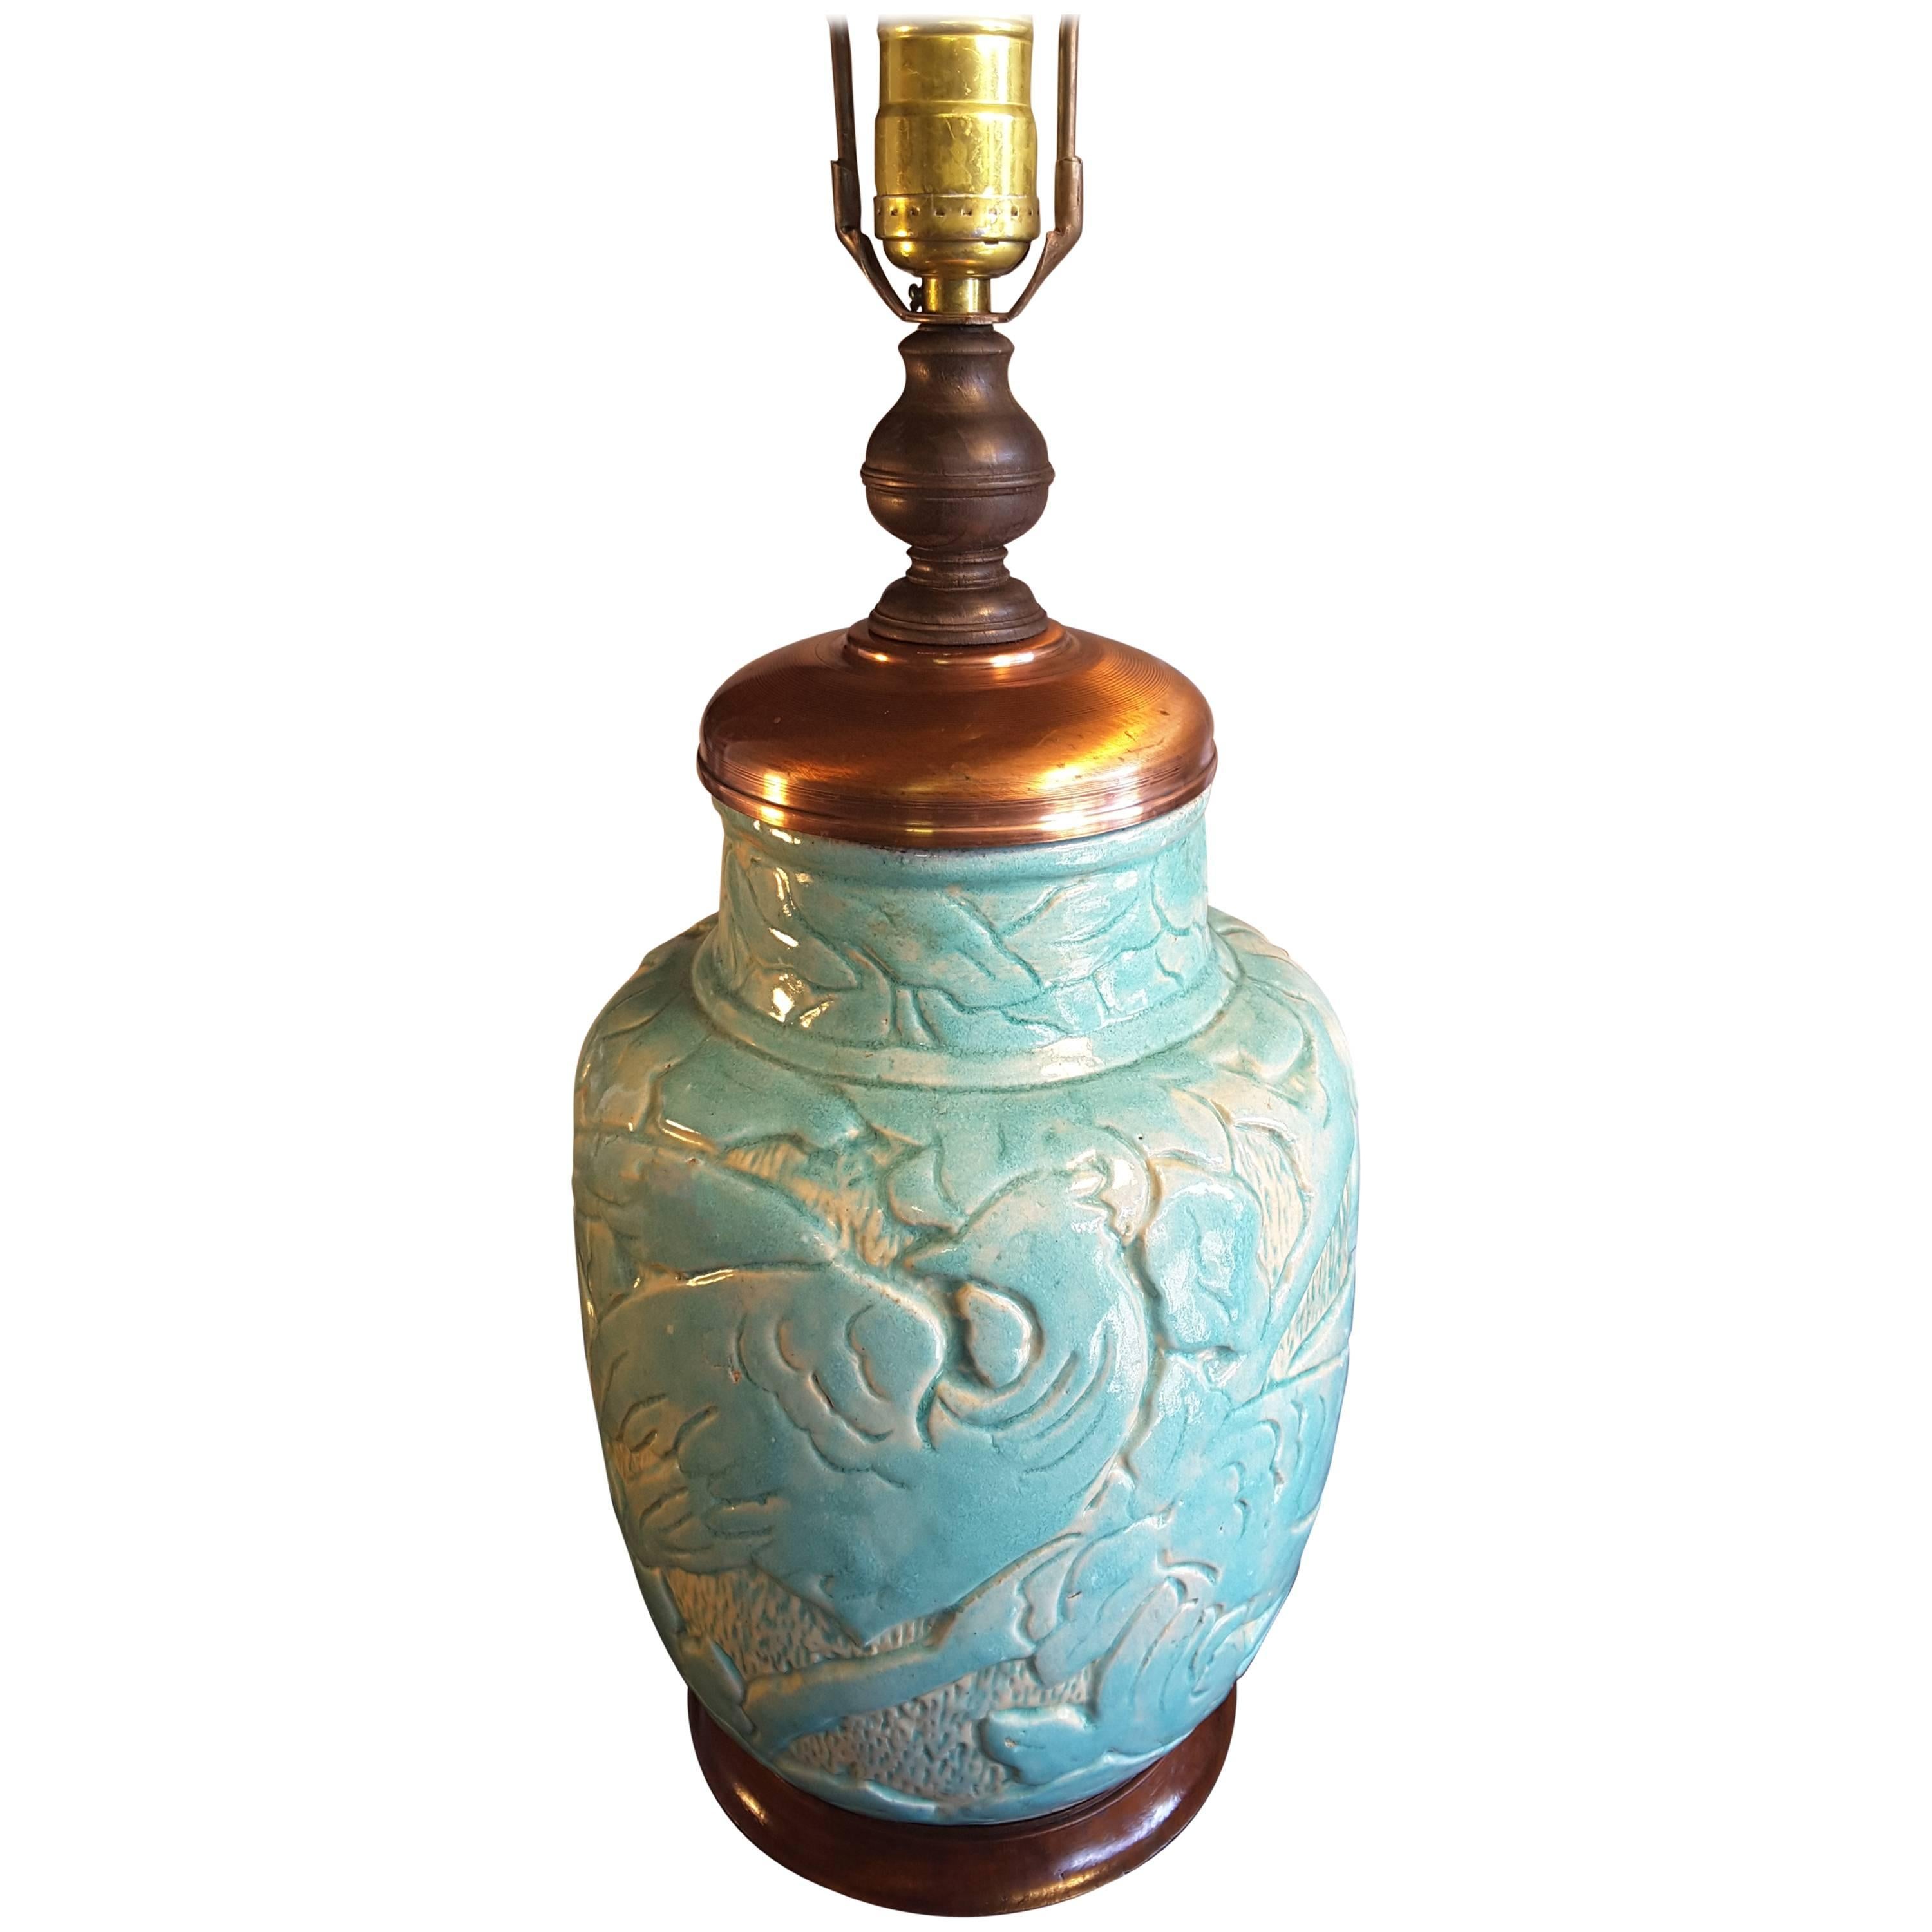 A Rare Massive Turquoise Enamelled "Zolo" Stoneware Vase, Mounted as a Lamp 1926 For Sale